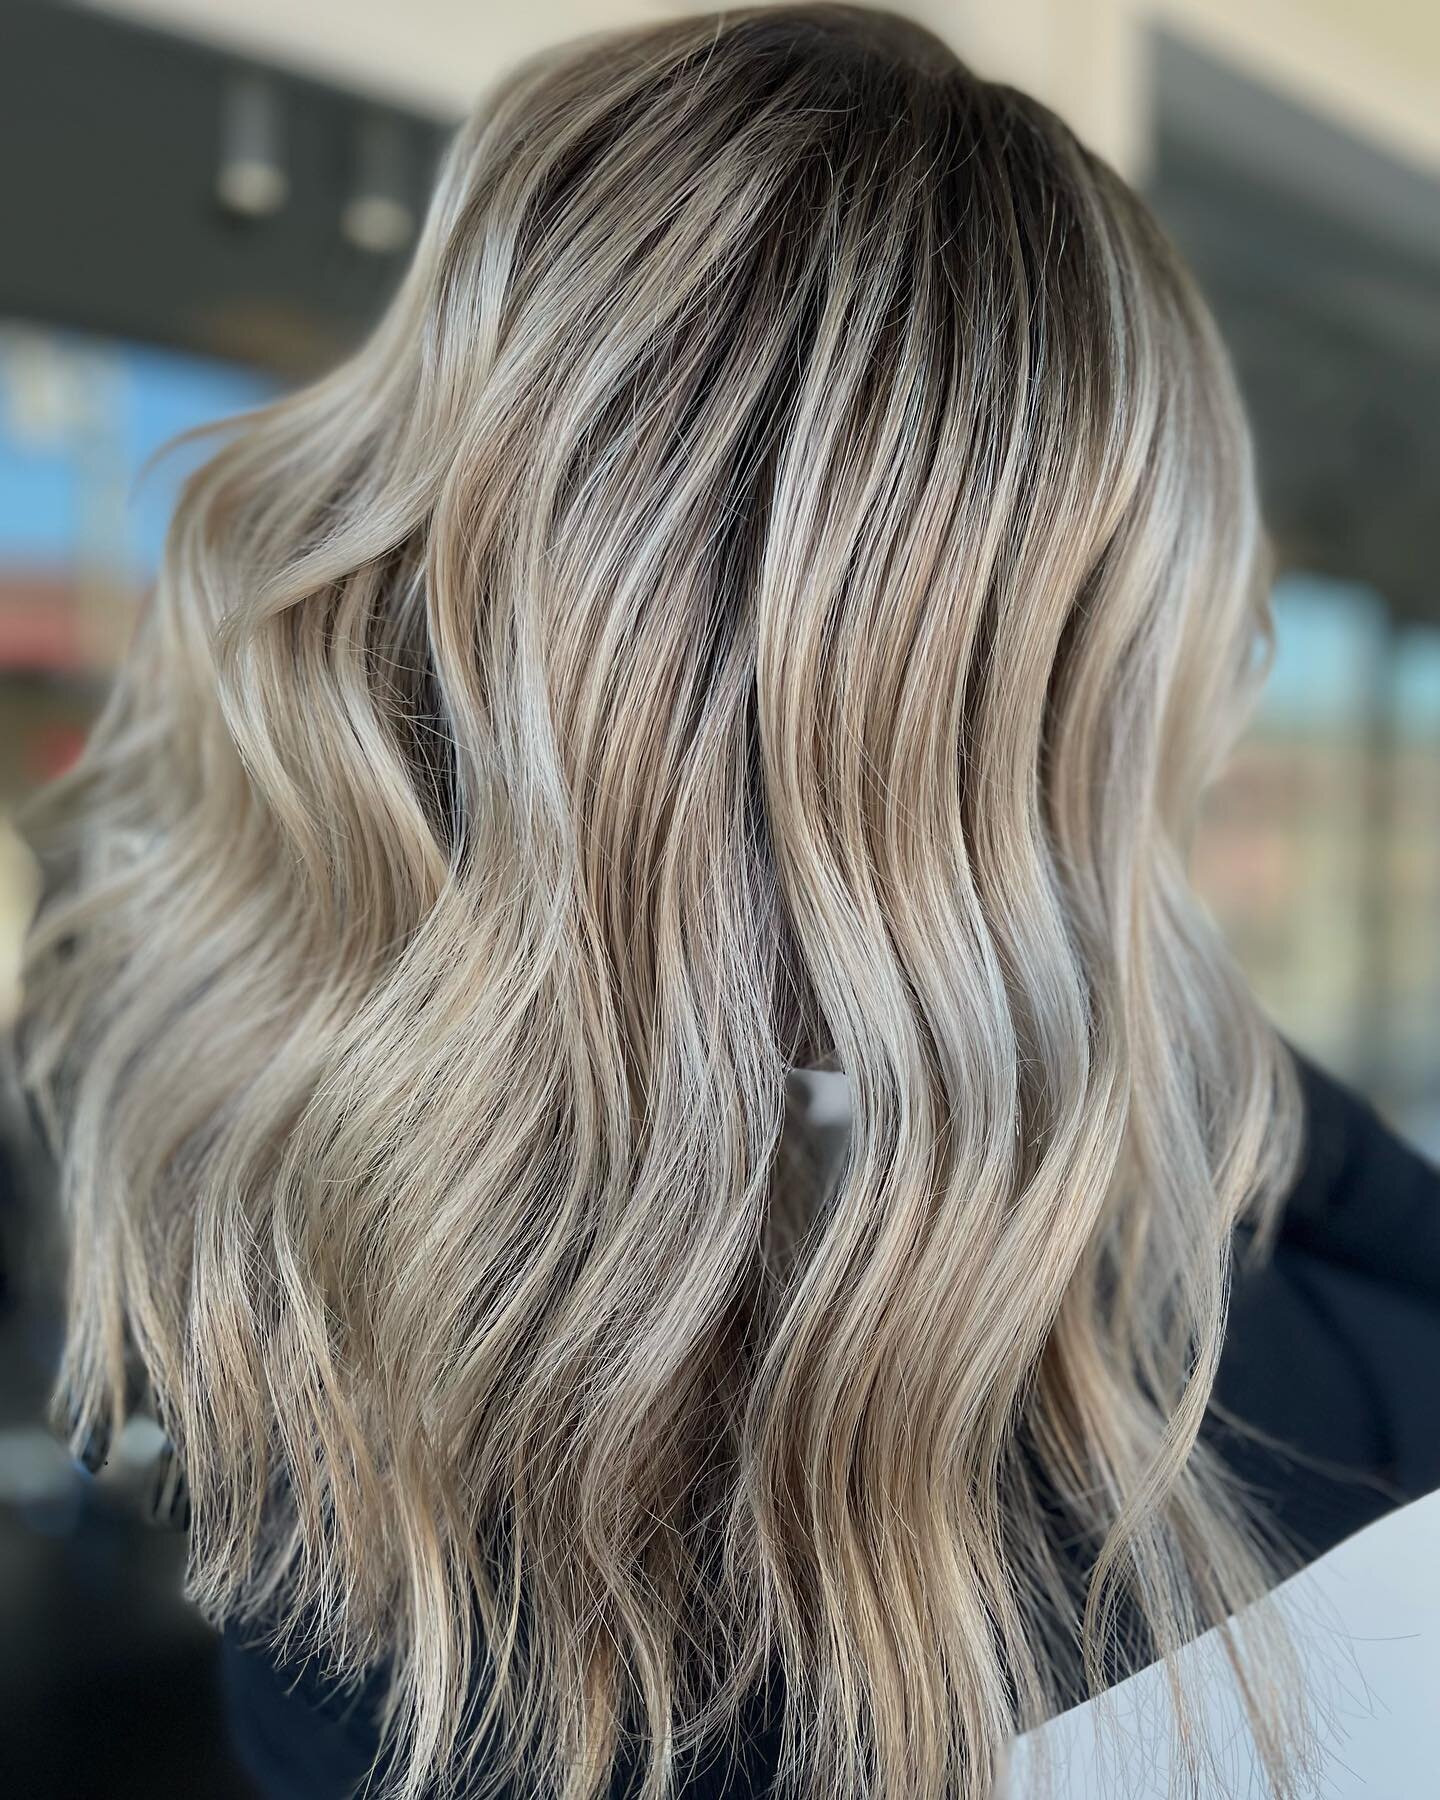 Another day, another melted Blonde 🤍 

This warm day has me sooo ready to brighten everyone up for spring! 

Swipe for before 📸

#CTHairArtist #CtBlonde ##Ctlivedinhair ##CtDimensionalcolor #Verb 
@lisamariehairco_ct